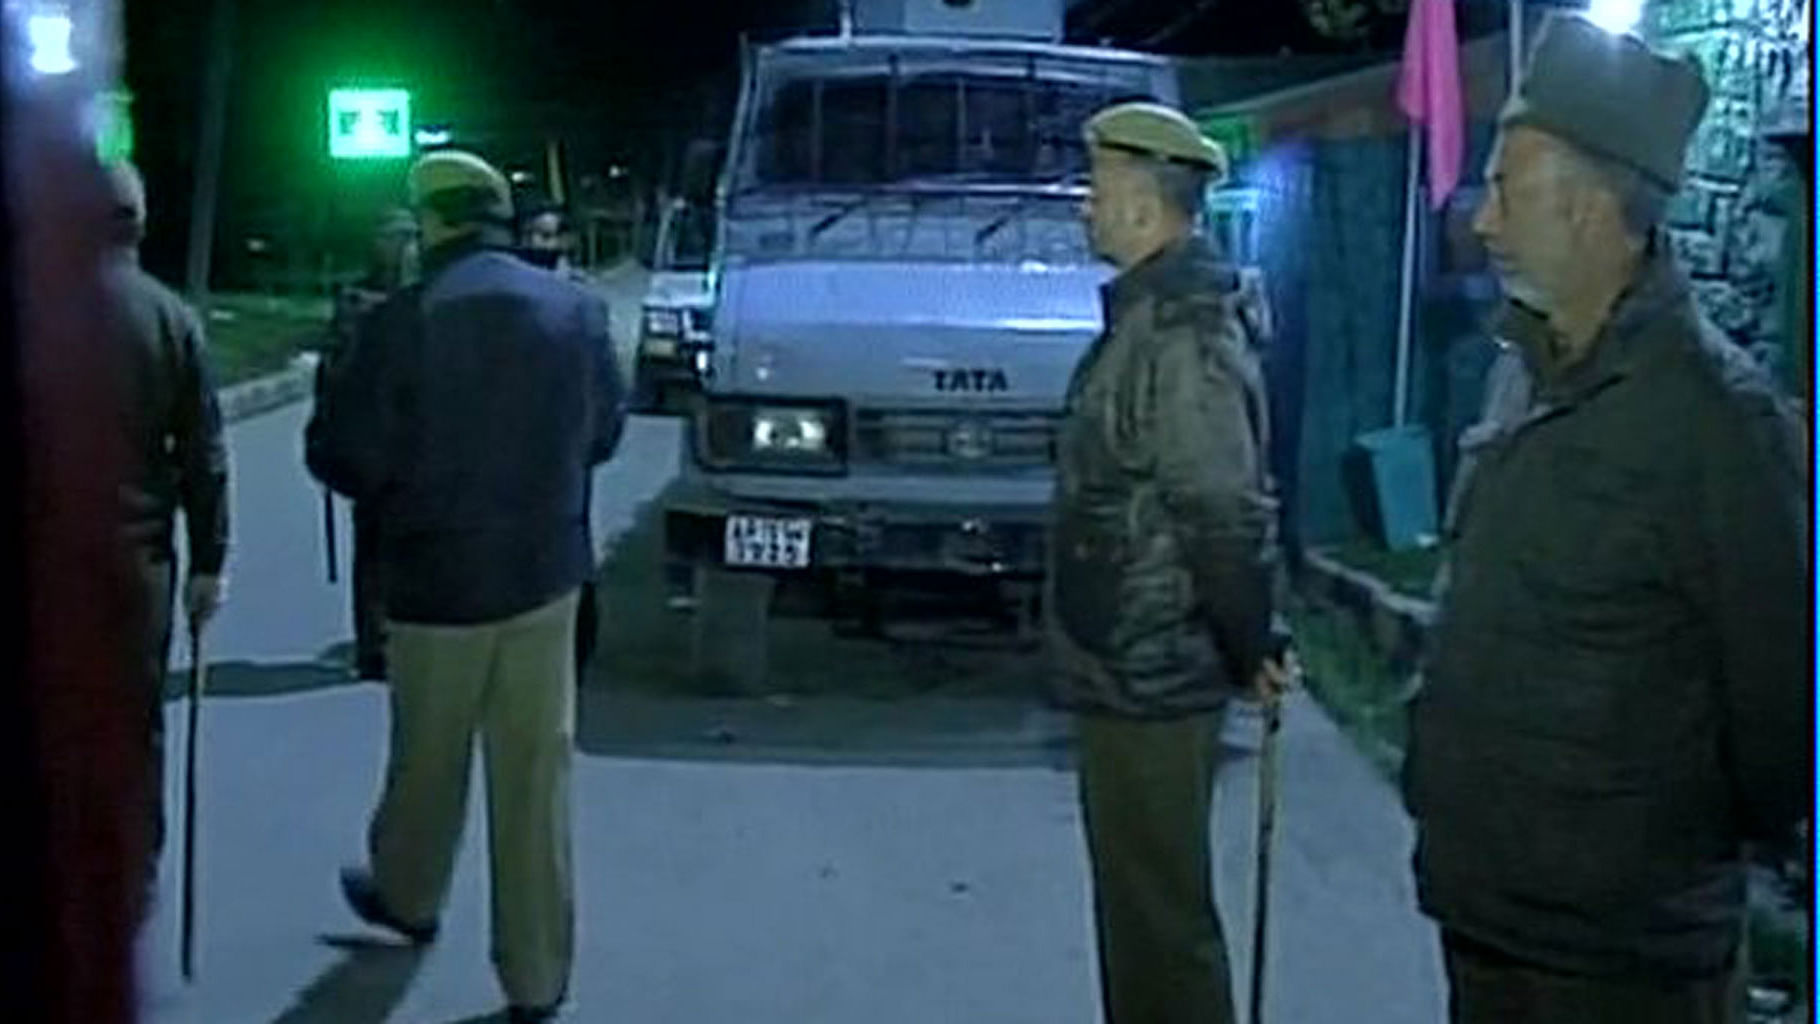 CRPF deployed inside NITSrinagar campus after few students were lathi charged by police,early Tuesday morning.(Photo:ANI)